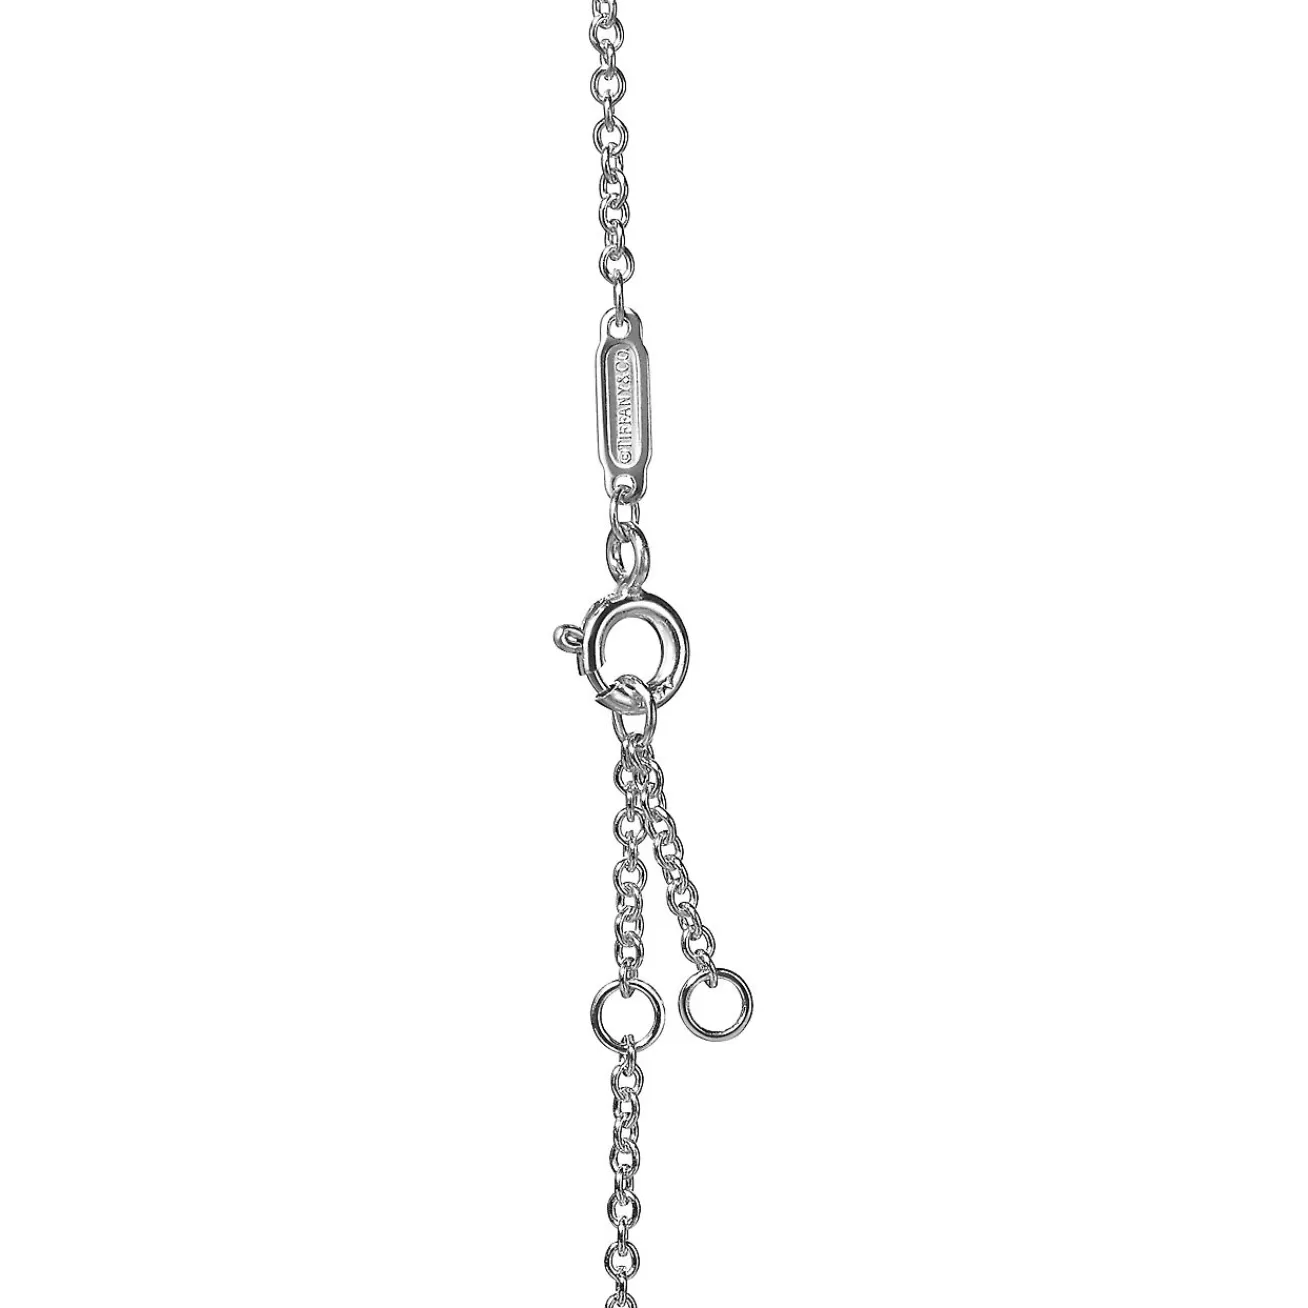 Tiffany & Co. Tiffany 1837® Interlocking Circles Chain Bracelet in Sterling Silver and Rose Go | ^ Bracelets | New Jewelry